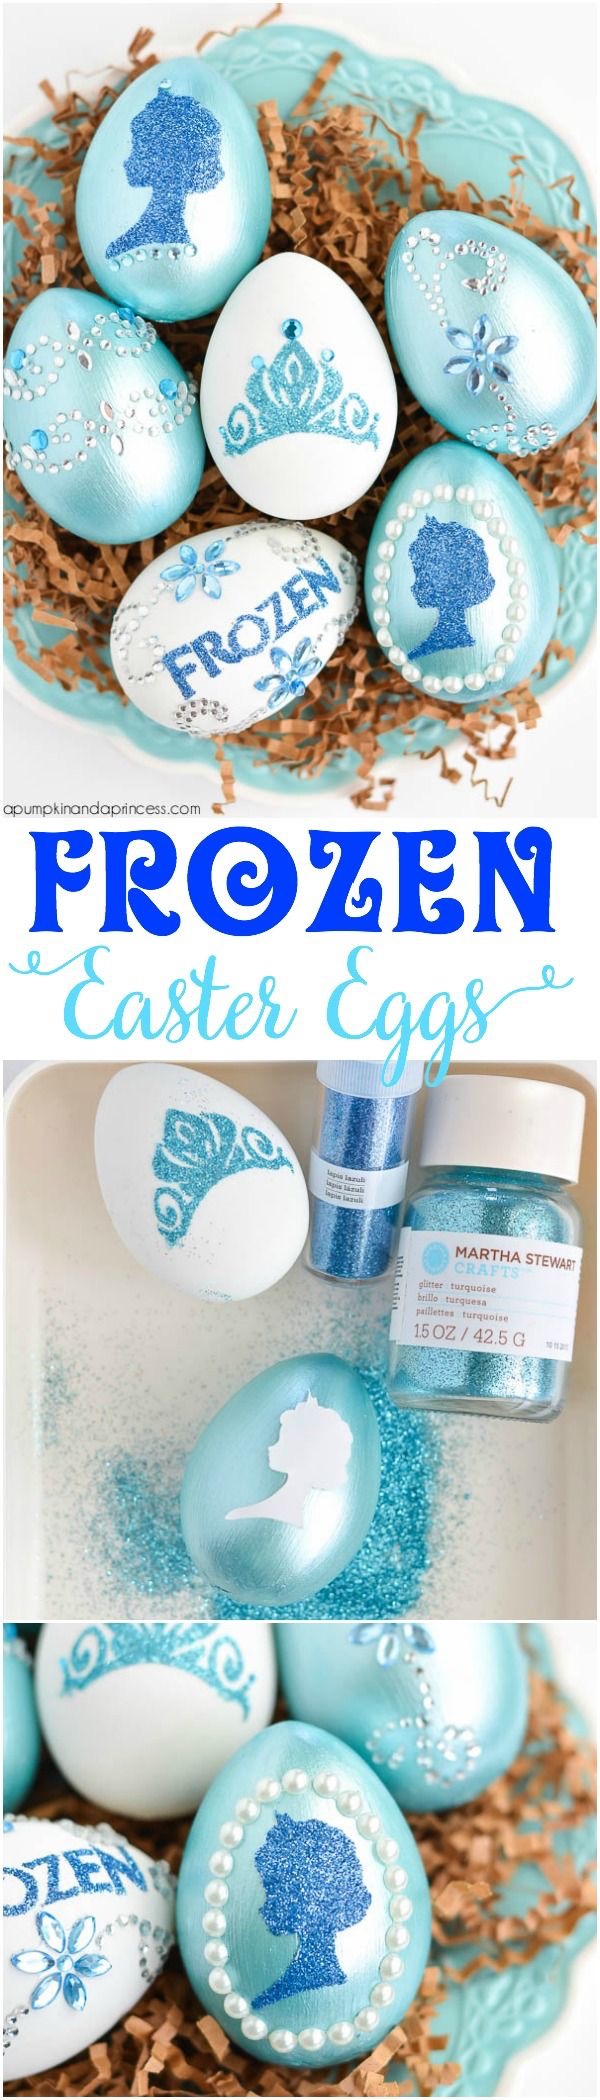 12 creative ways to decorate Easter eggs...